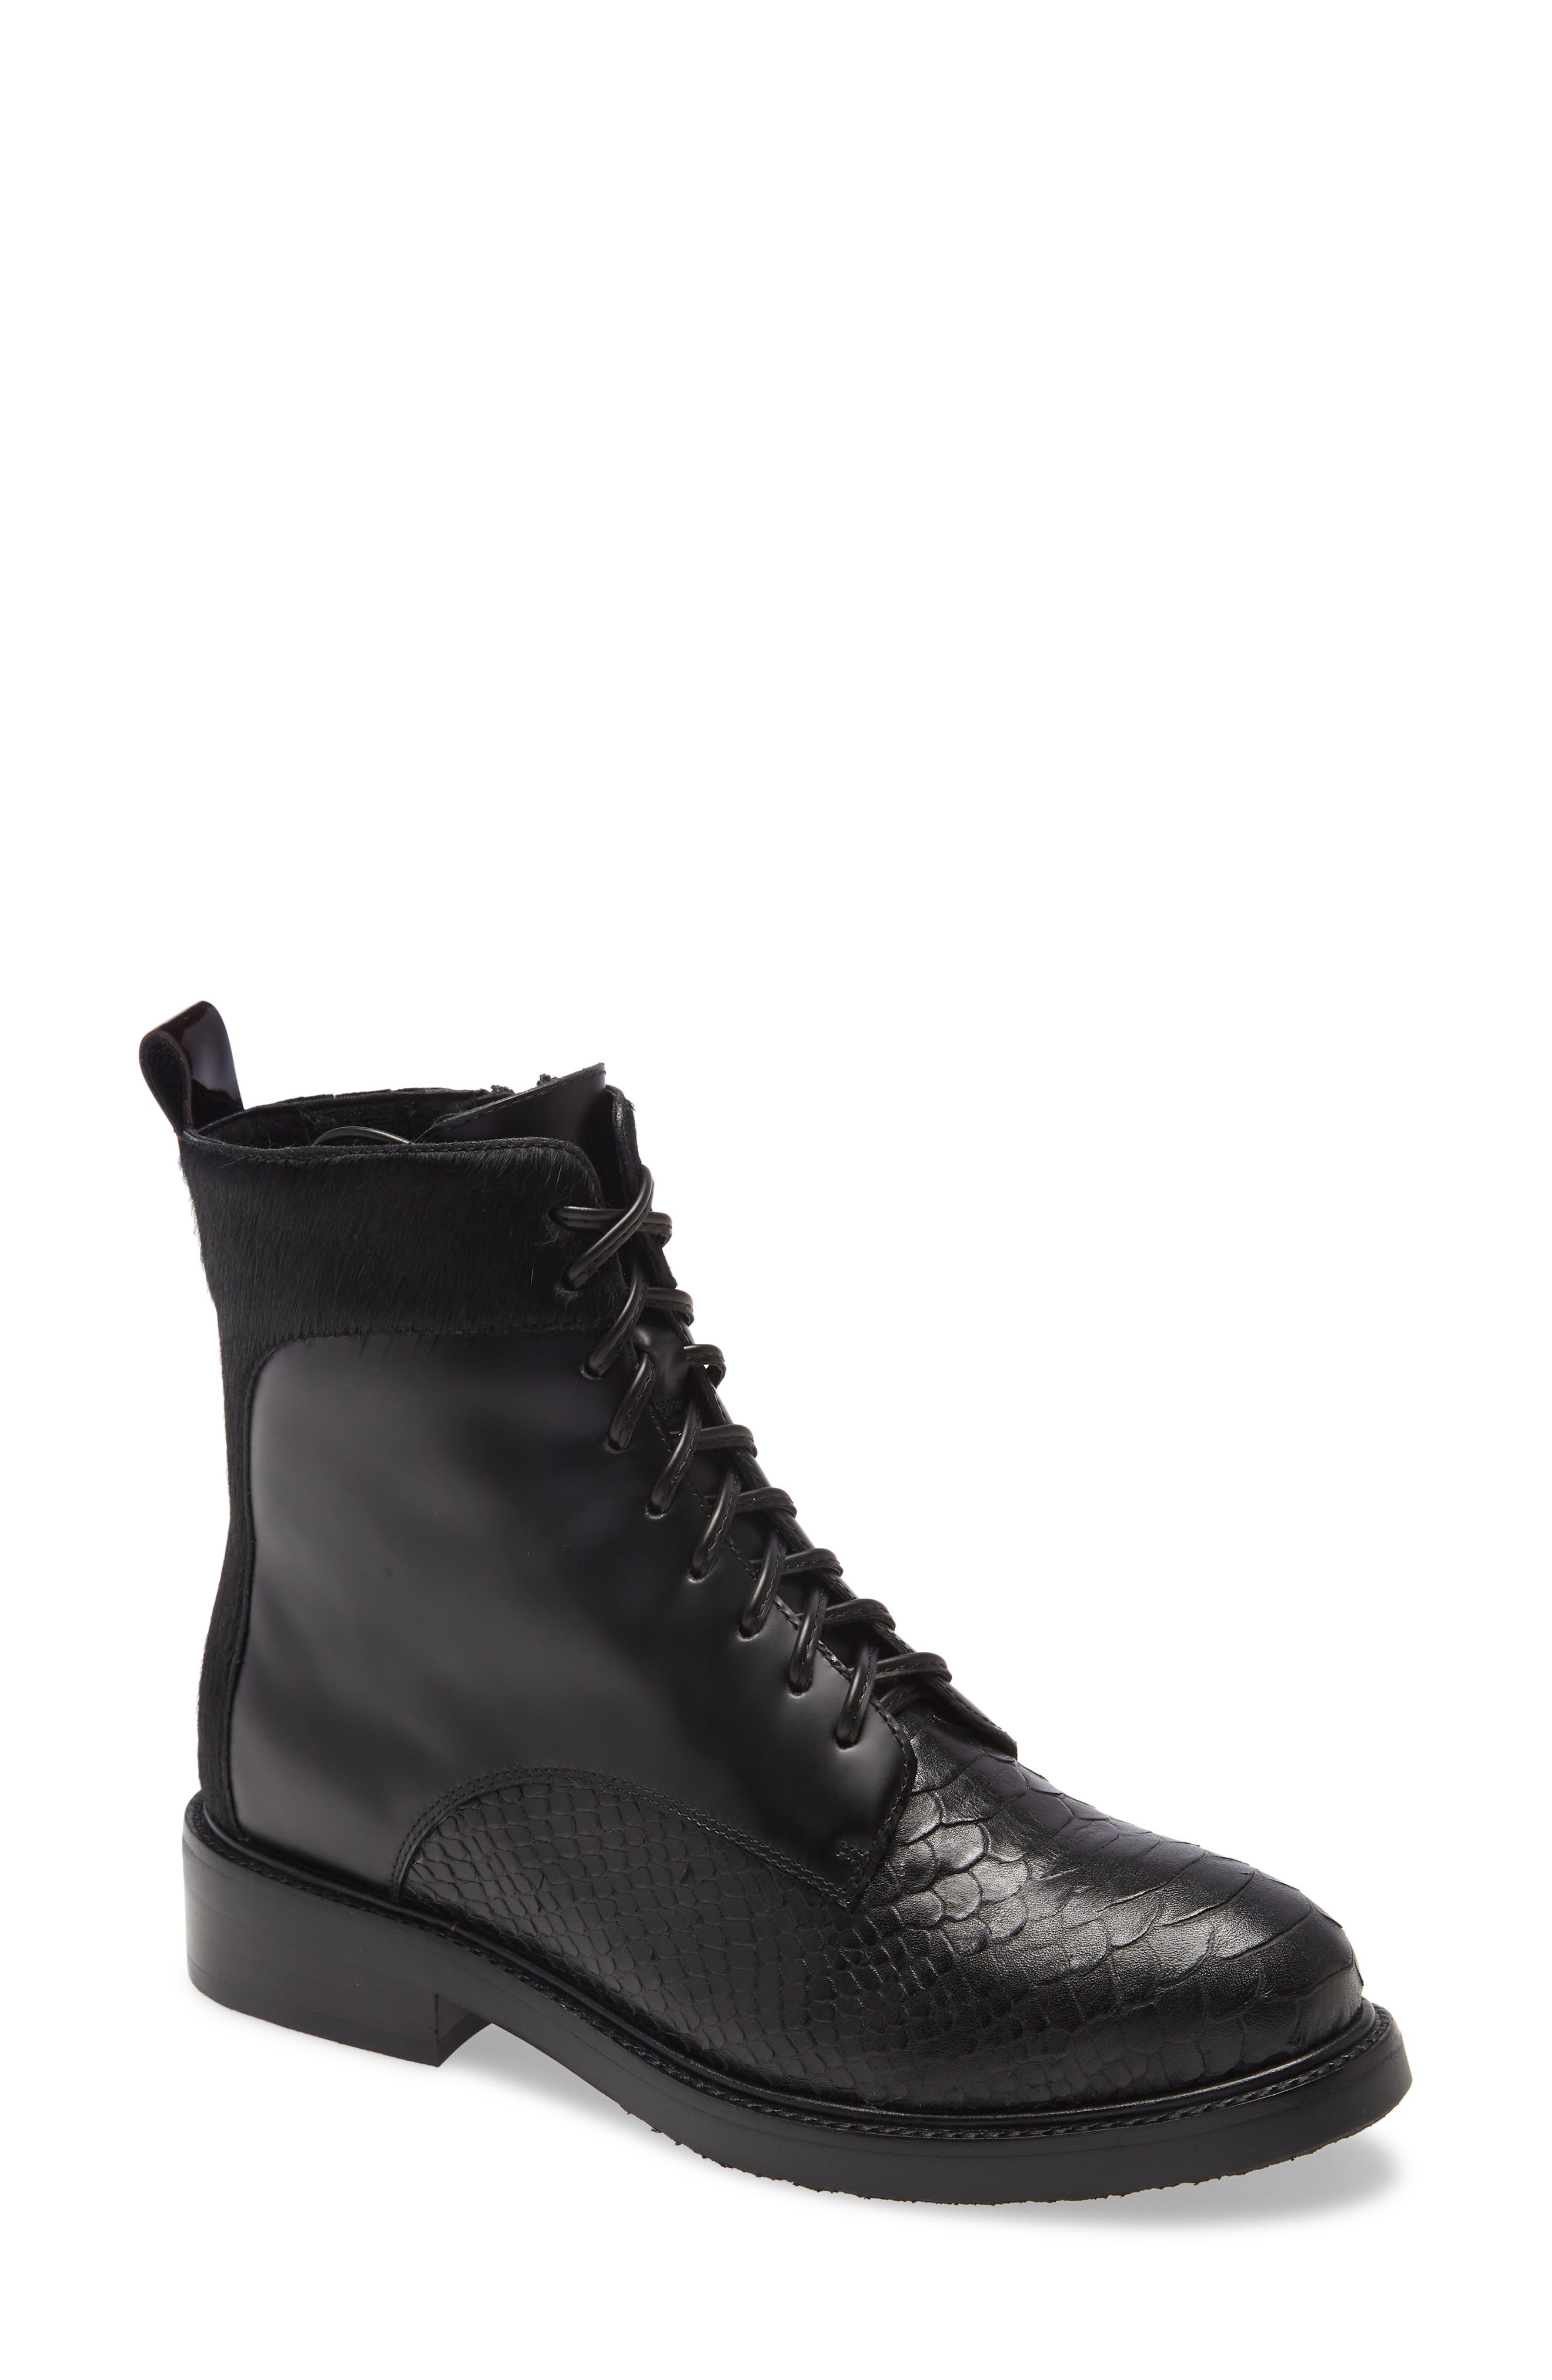 JEFFREY CAMPBELL FISCHER LACE-UP LEATHER BOOT,193131777856